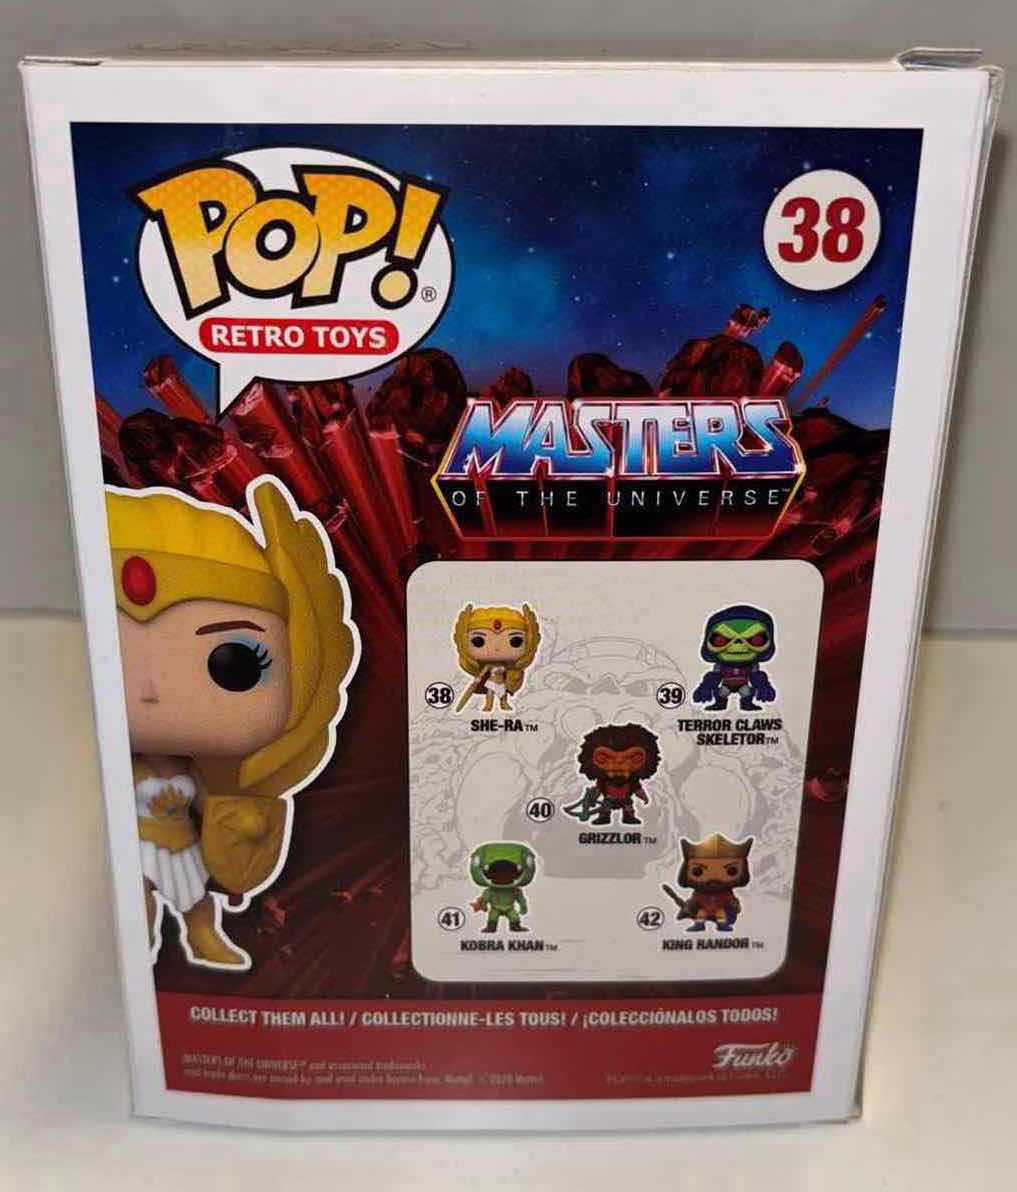 Photo 4 of NEW FUNKO POP! RETRO TOYS VINYL FIGURE 6-PACK, MASTERS OF THE UNIVERSE #38 SHE-RA GLOW IN THE DARK LIMITED EDITION EXCLUSIVE SPECIALTY SERIES (3) & #38 SHE-RA (3)